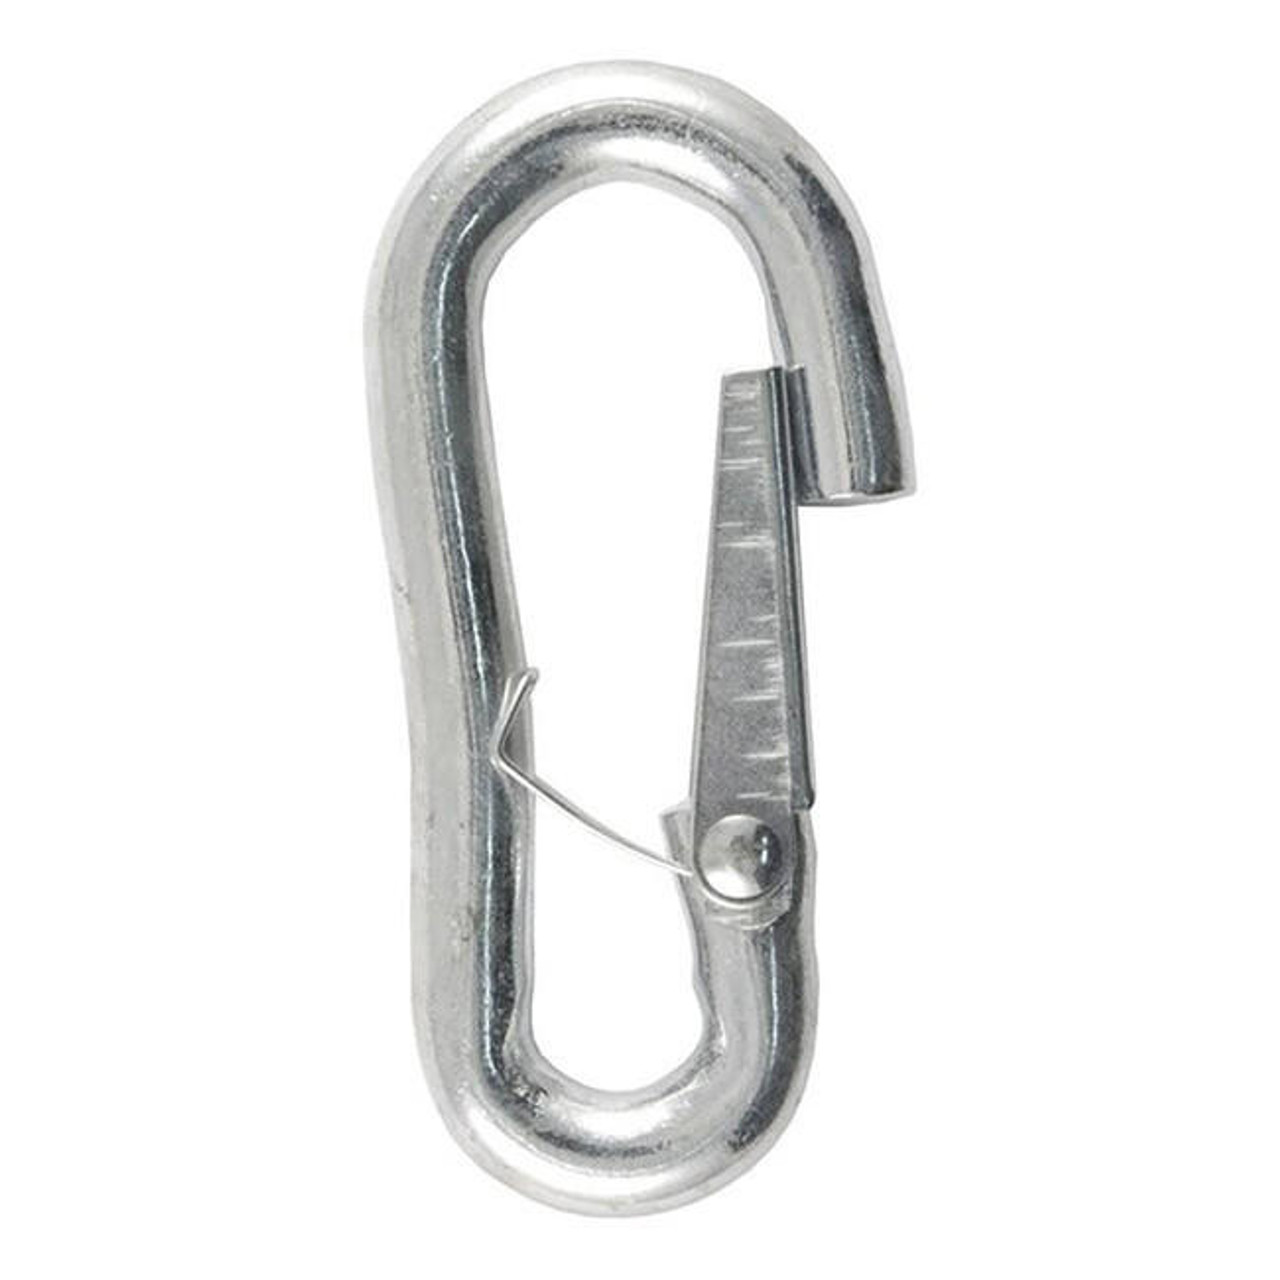 https://cdn11.bigcommerce.com/s-ohy7i05/images/stencil/1280x1280/products/1012/25979/curt-class-iii-s-hook-wsafety-latch-bulk-zinc-finish-5000-gross-trailer-weight-716-in-dia__12075.1688590964.jpg?c=3